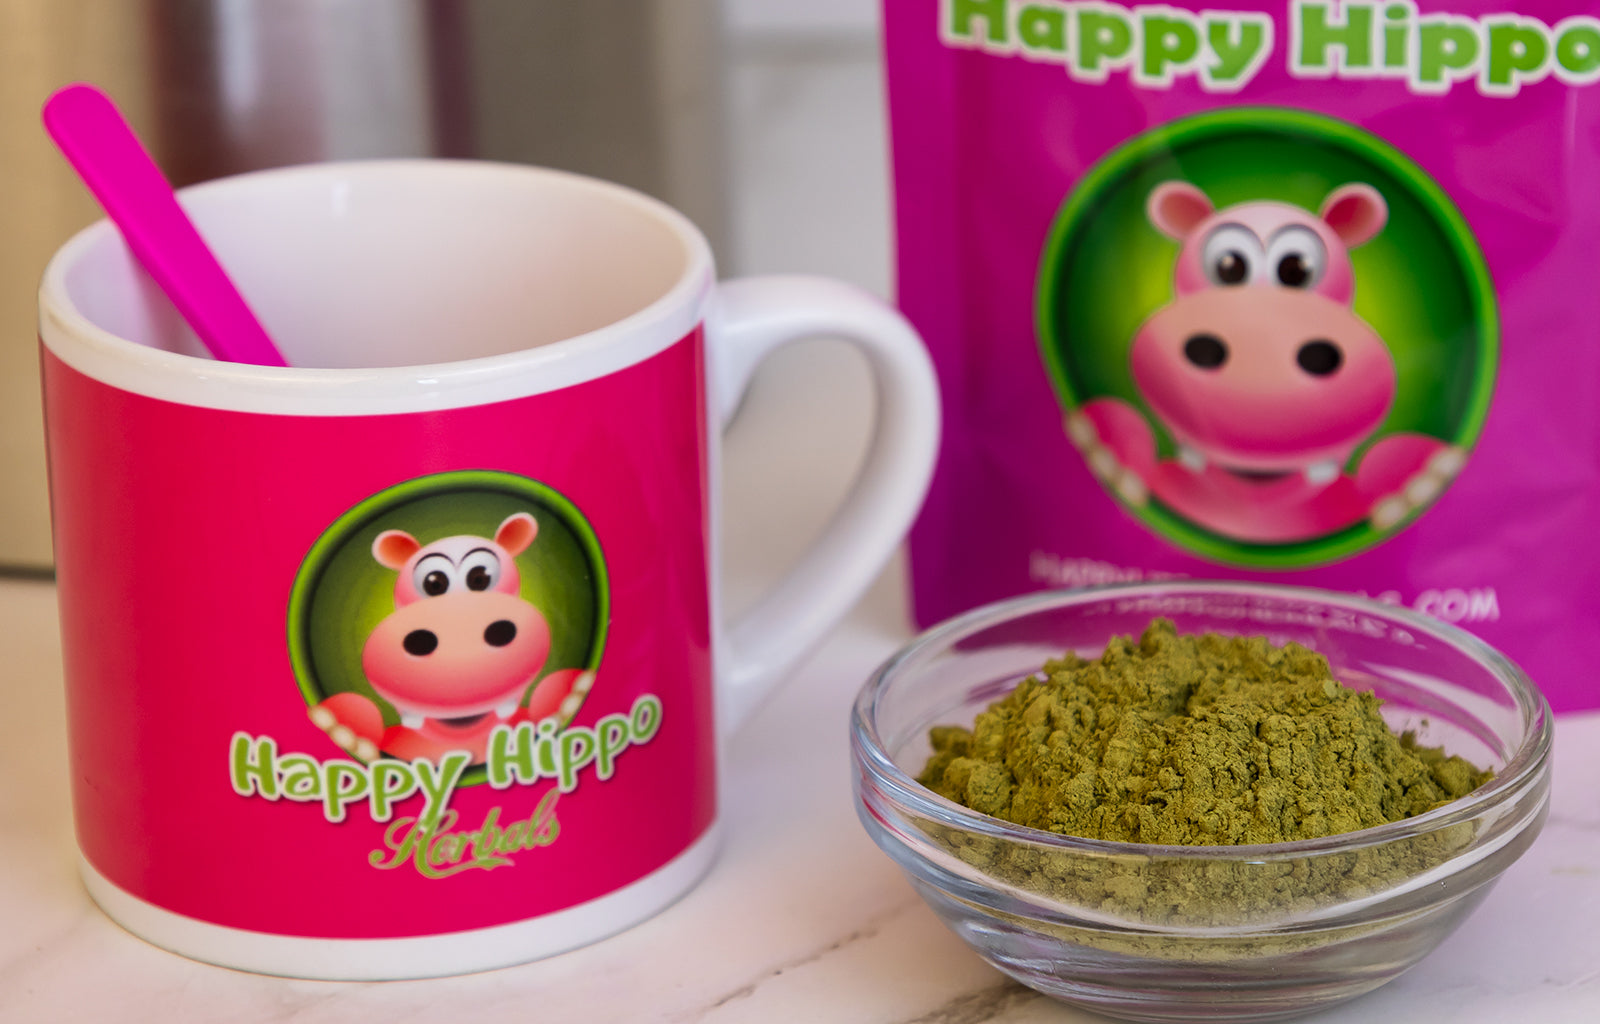 Featured image depicting an assortment of Happy Hippo branded products, a coffee mug, a 1oz packet of White Maeng Da Kratom Powder, and a small ramekin filled with loose white maeng da kratom powder.